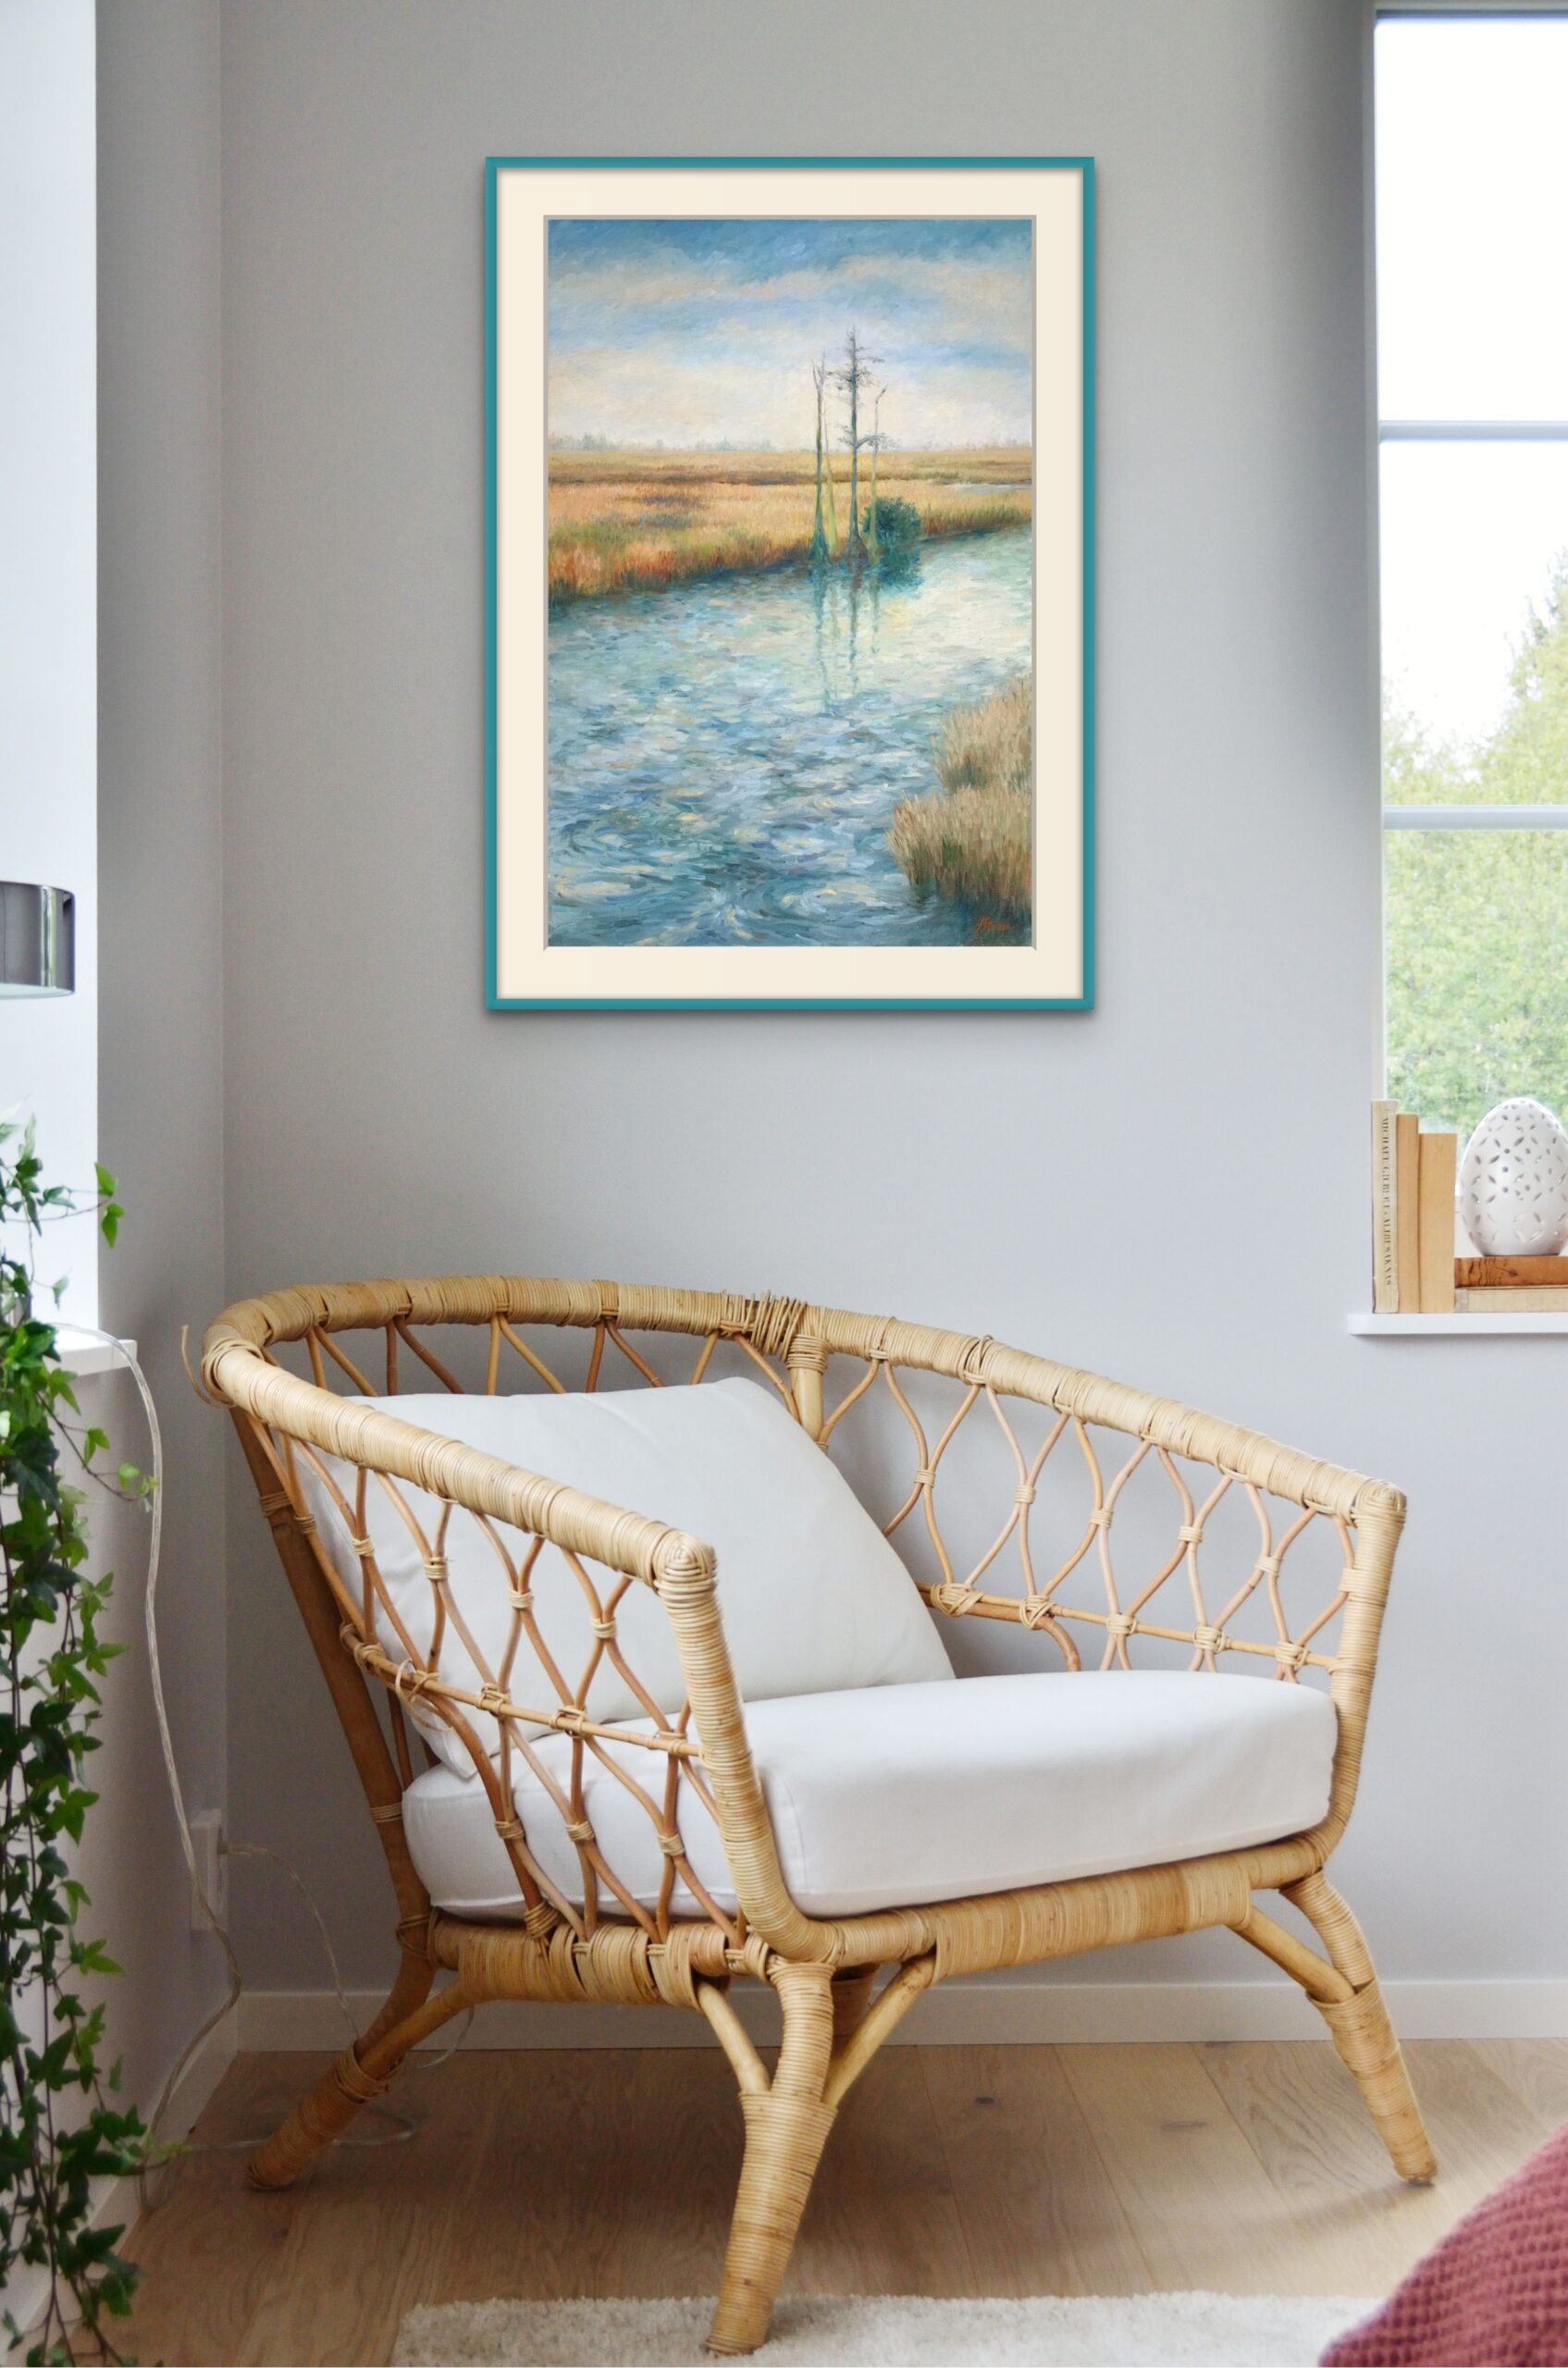 Whirling Waters - Painting by Lisa Strazza - displayed in a casual sitting area.